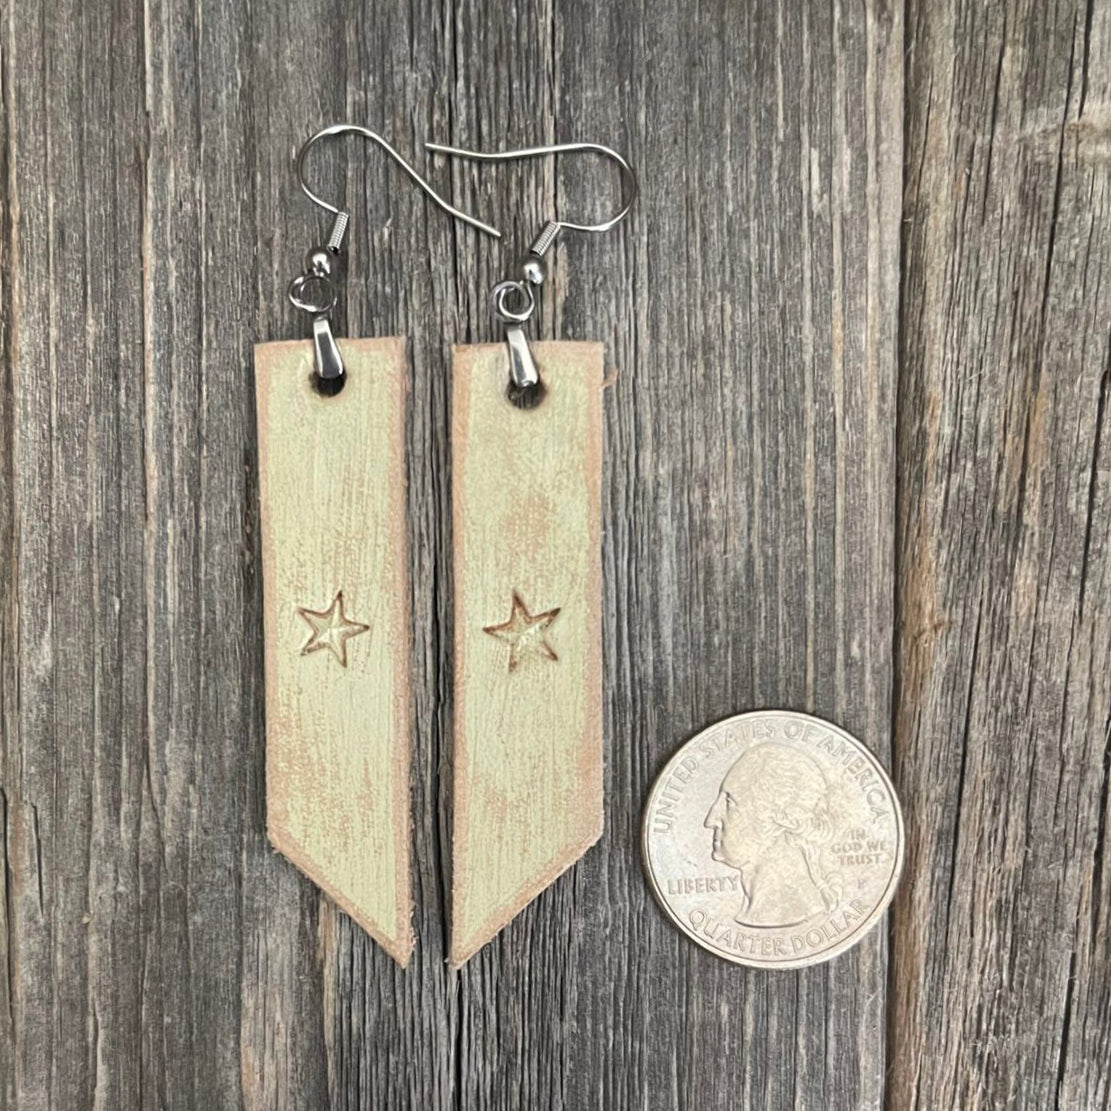 MADE TO ORDER - Genuine Leather Drop Boho Stripes Earrings with Star